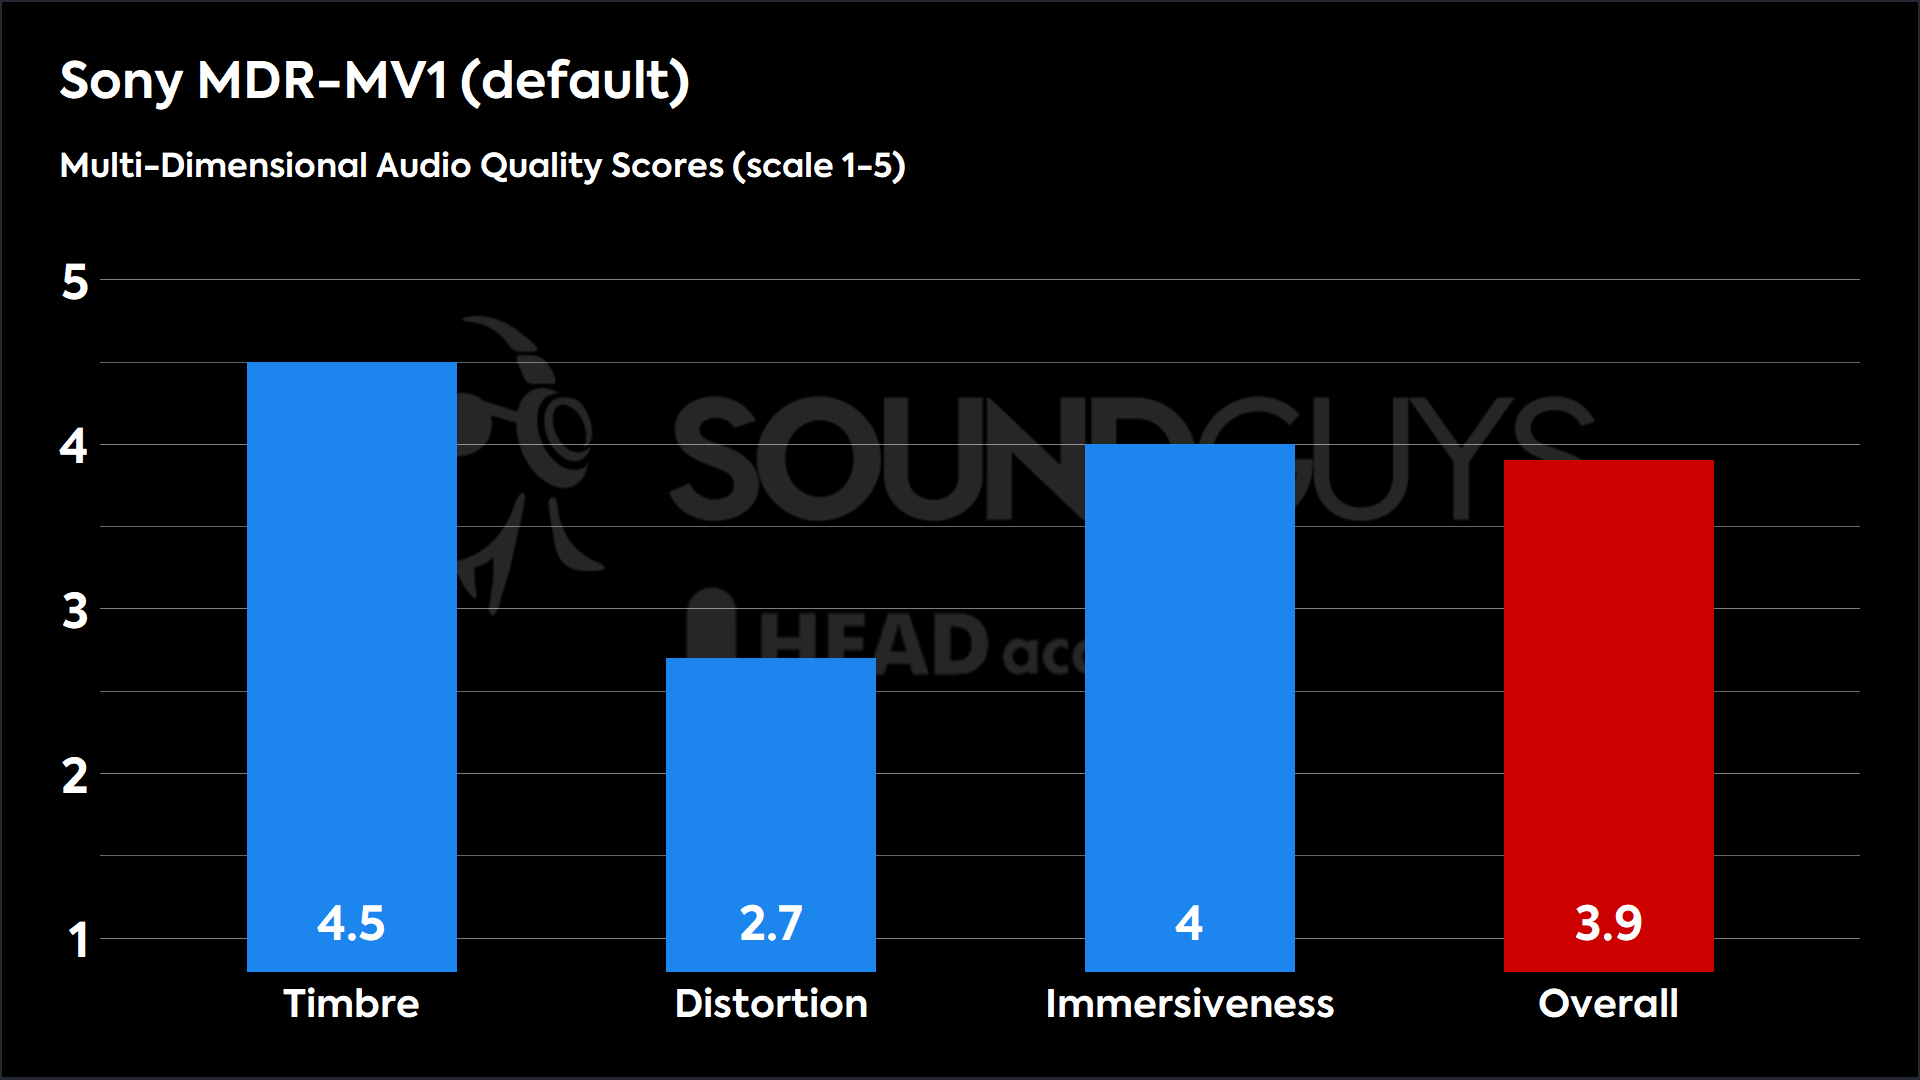 This chart shows the MDAQS results for the Sony MDR-MV1 in default mode. The Timbre score is 4.5, The Distortion score is 2.7, the Immersiveness score is 4, and the Overall Score is 3.9).